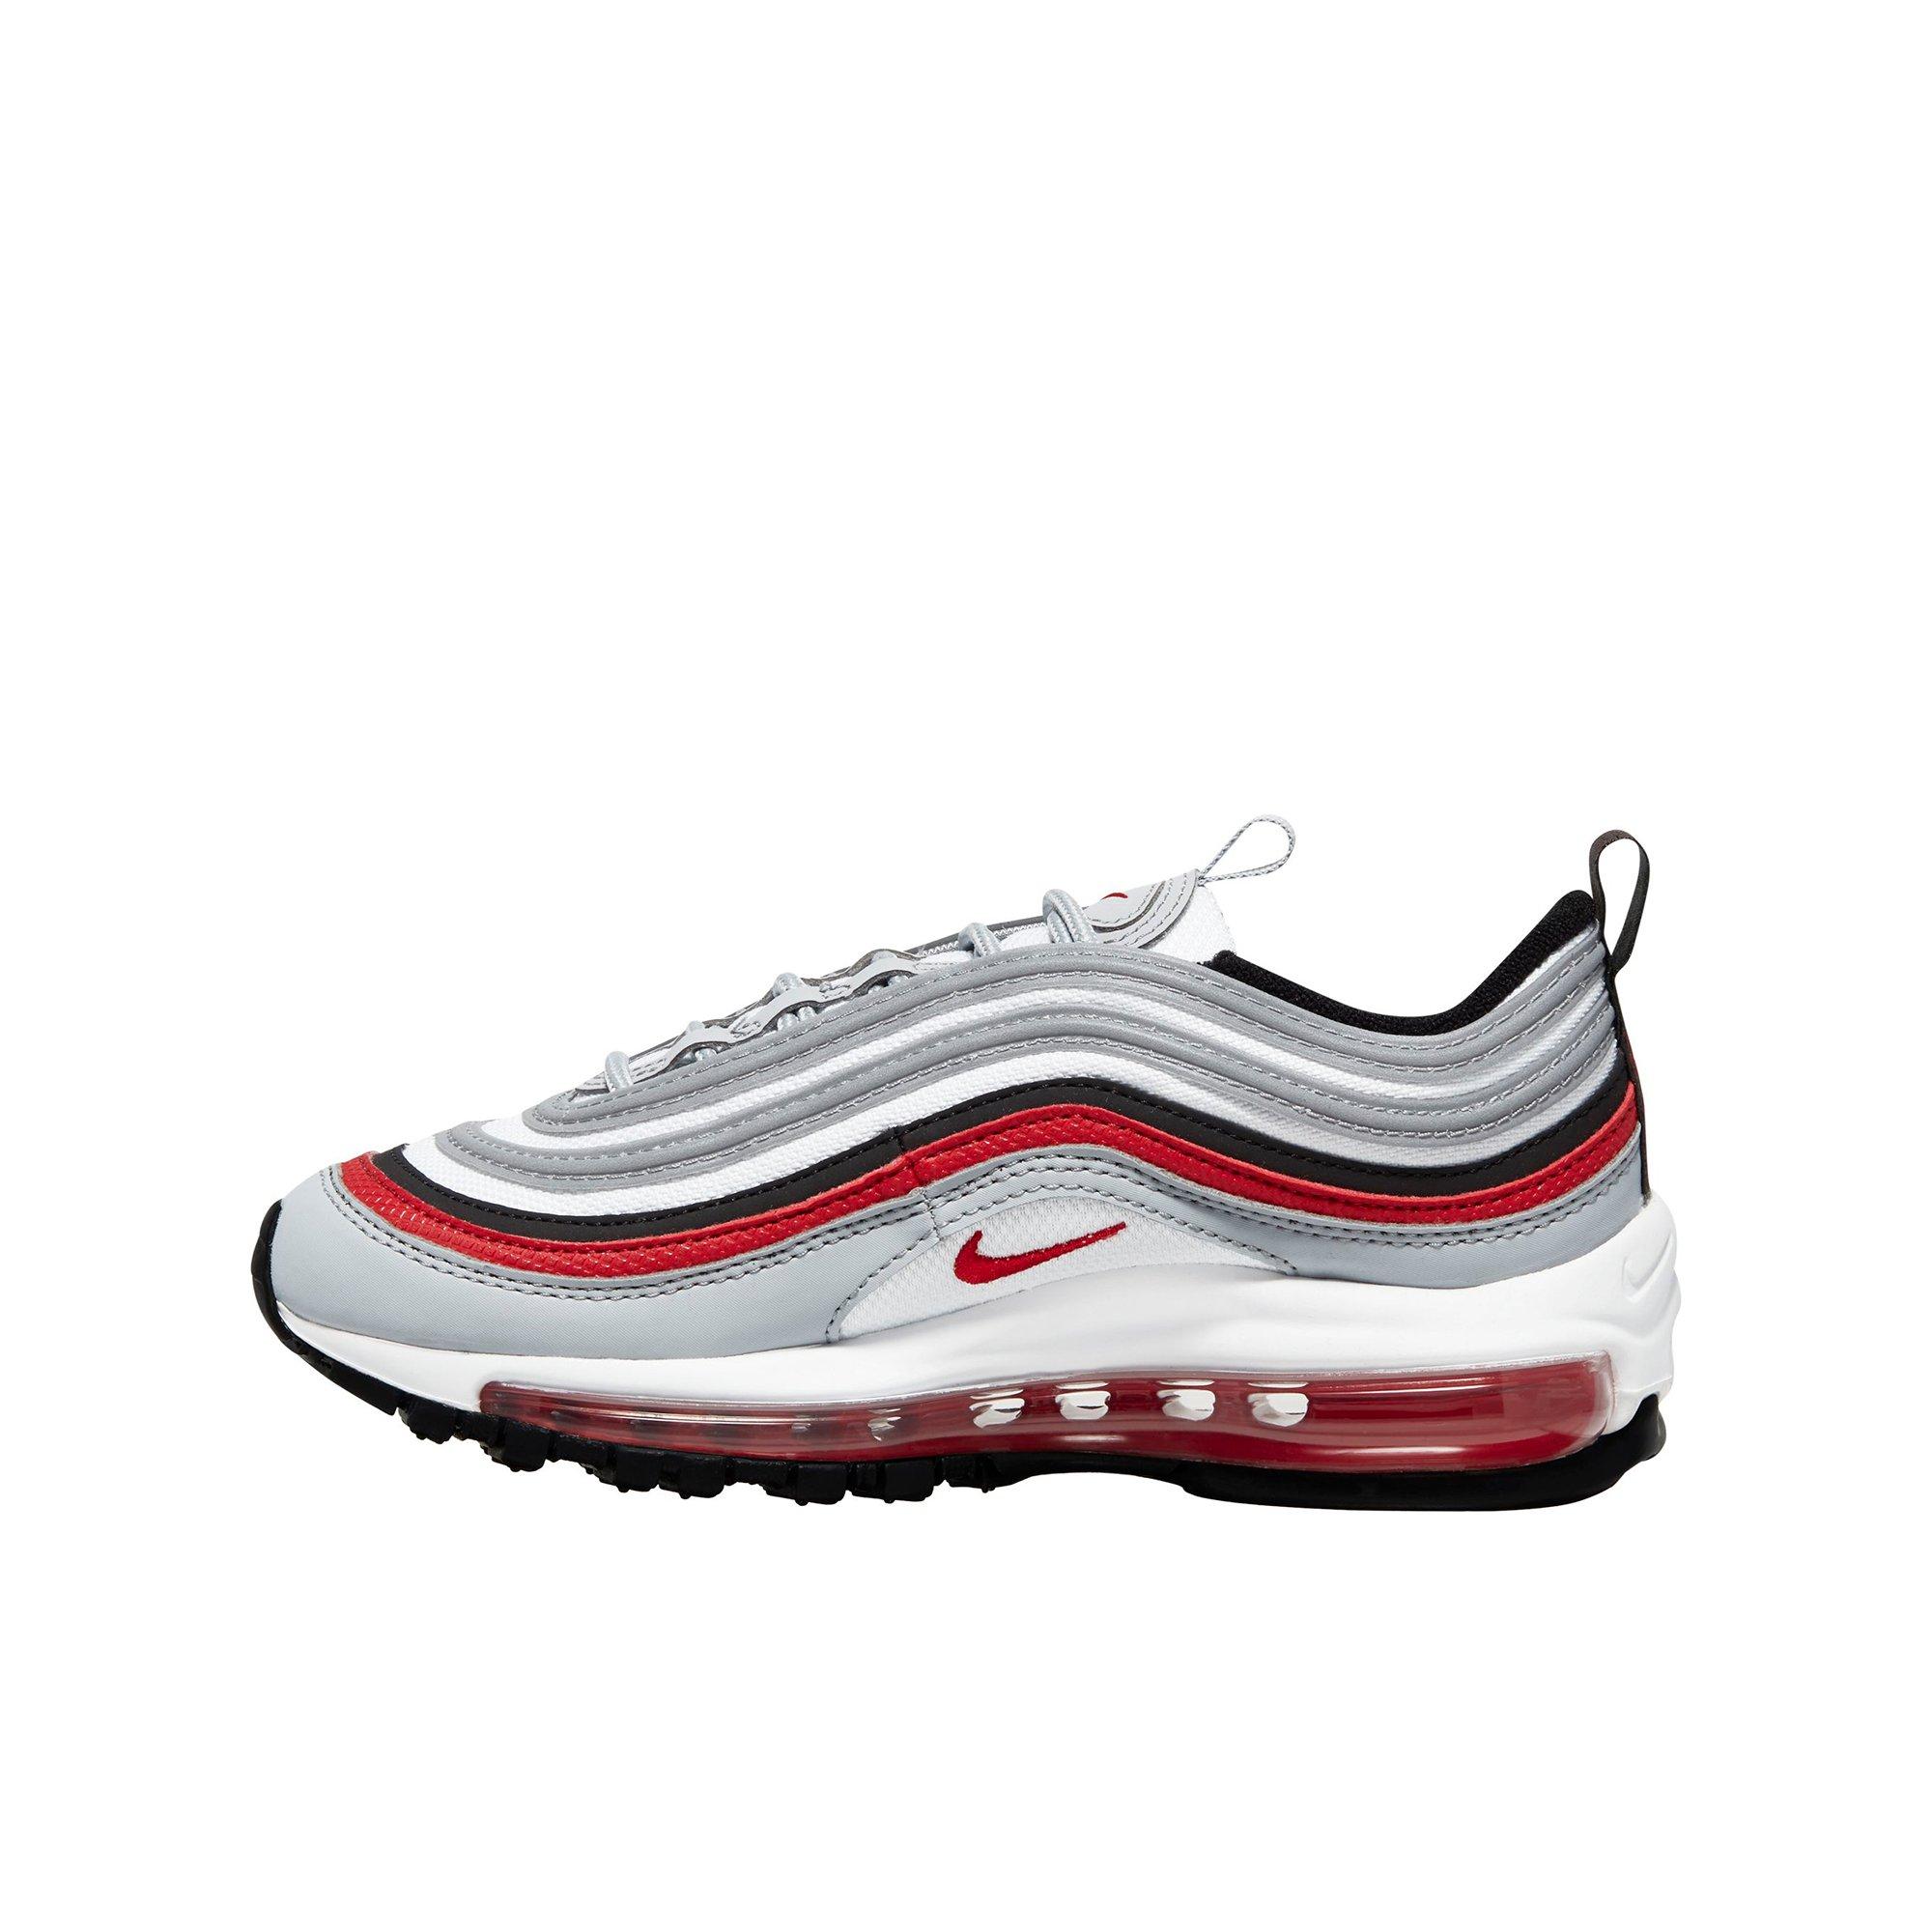 nike 97 grey and red